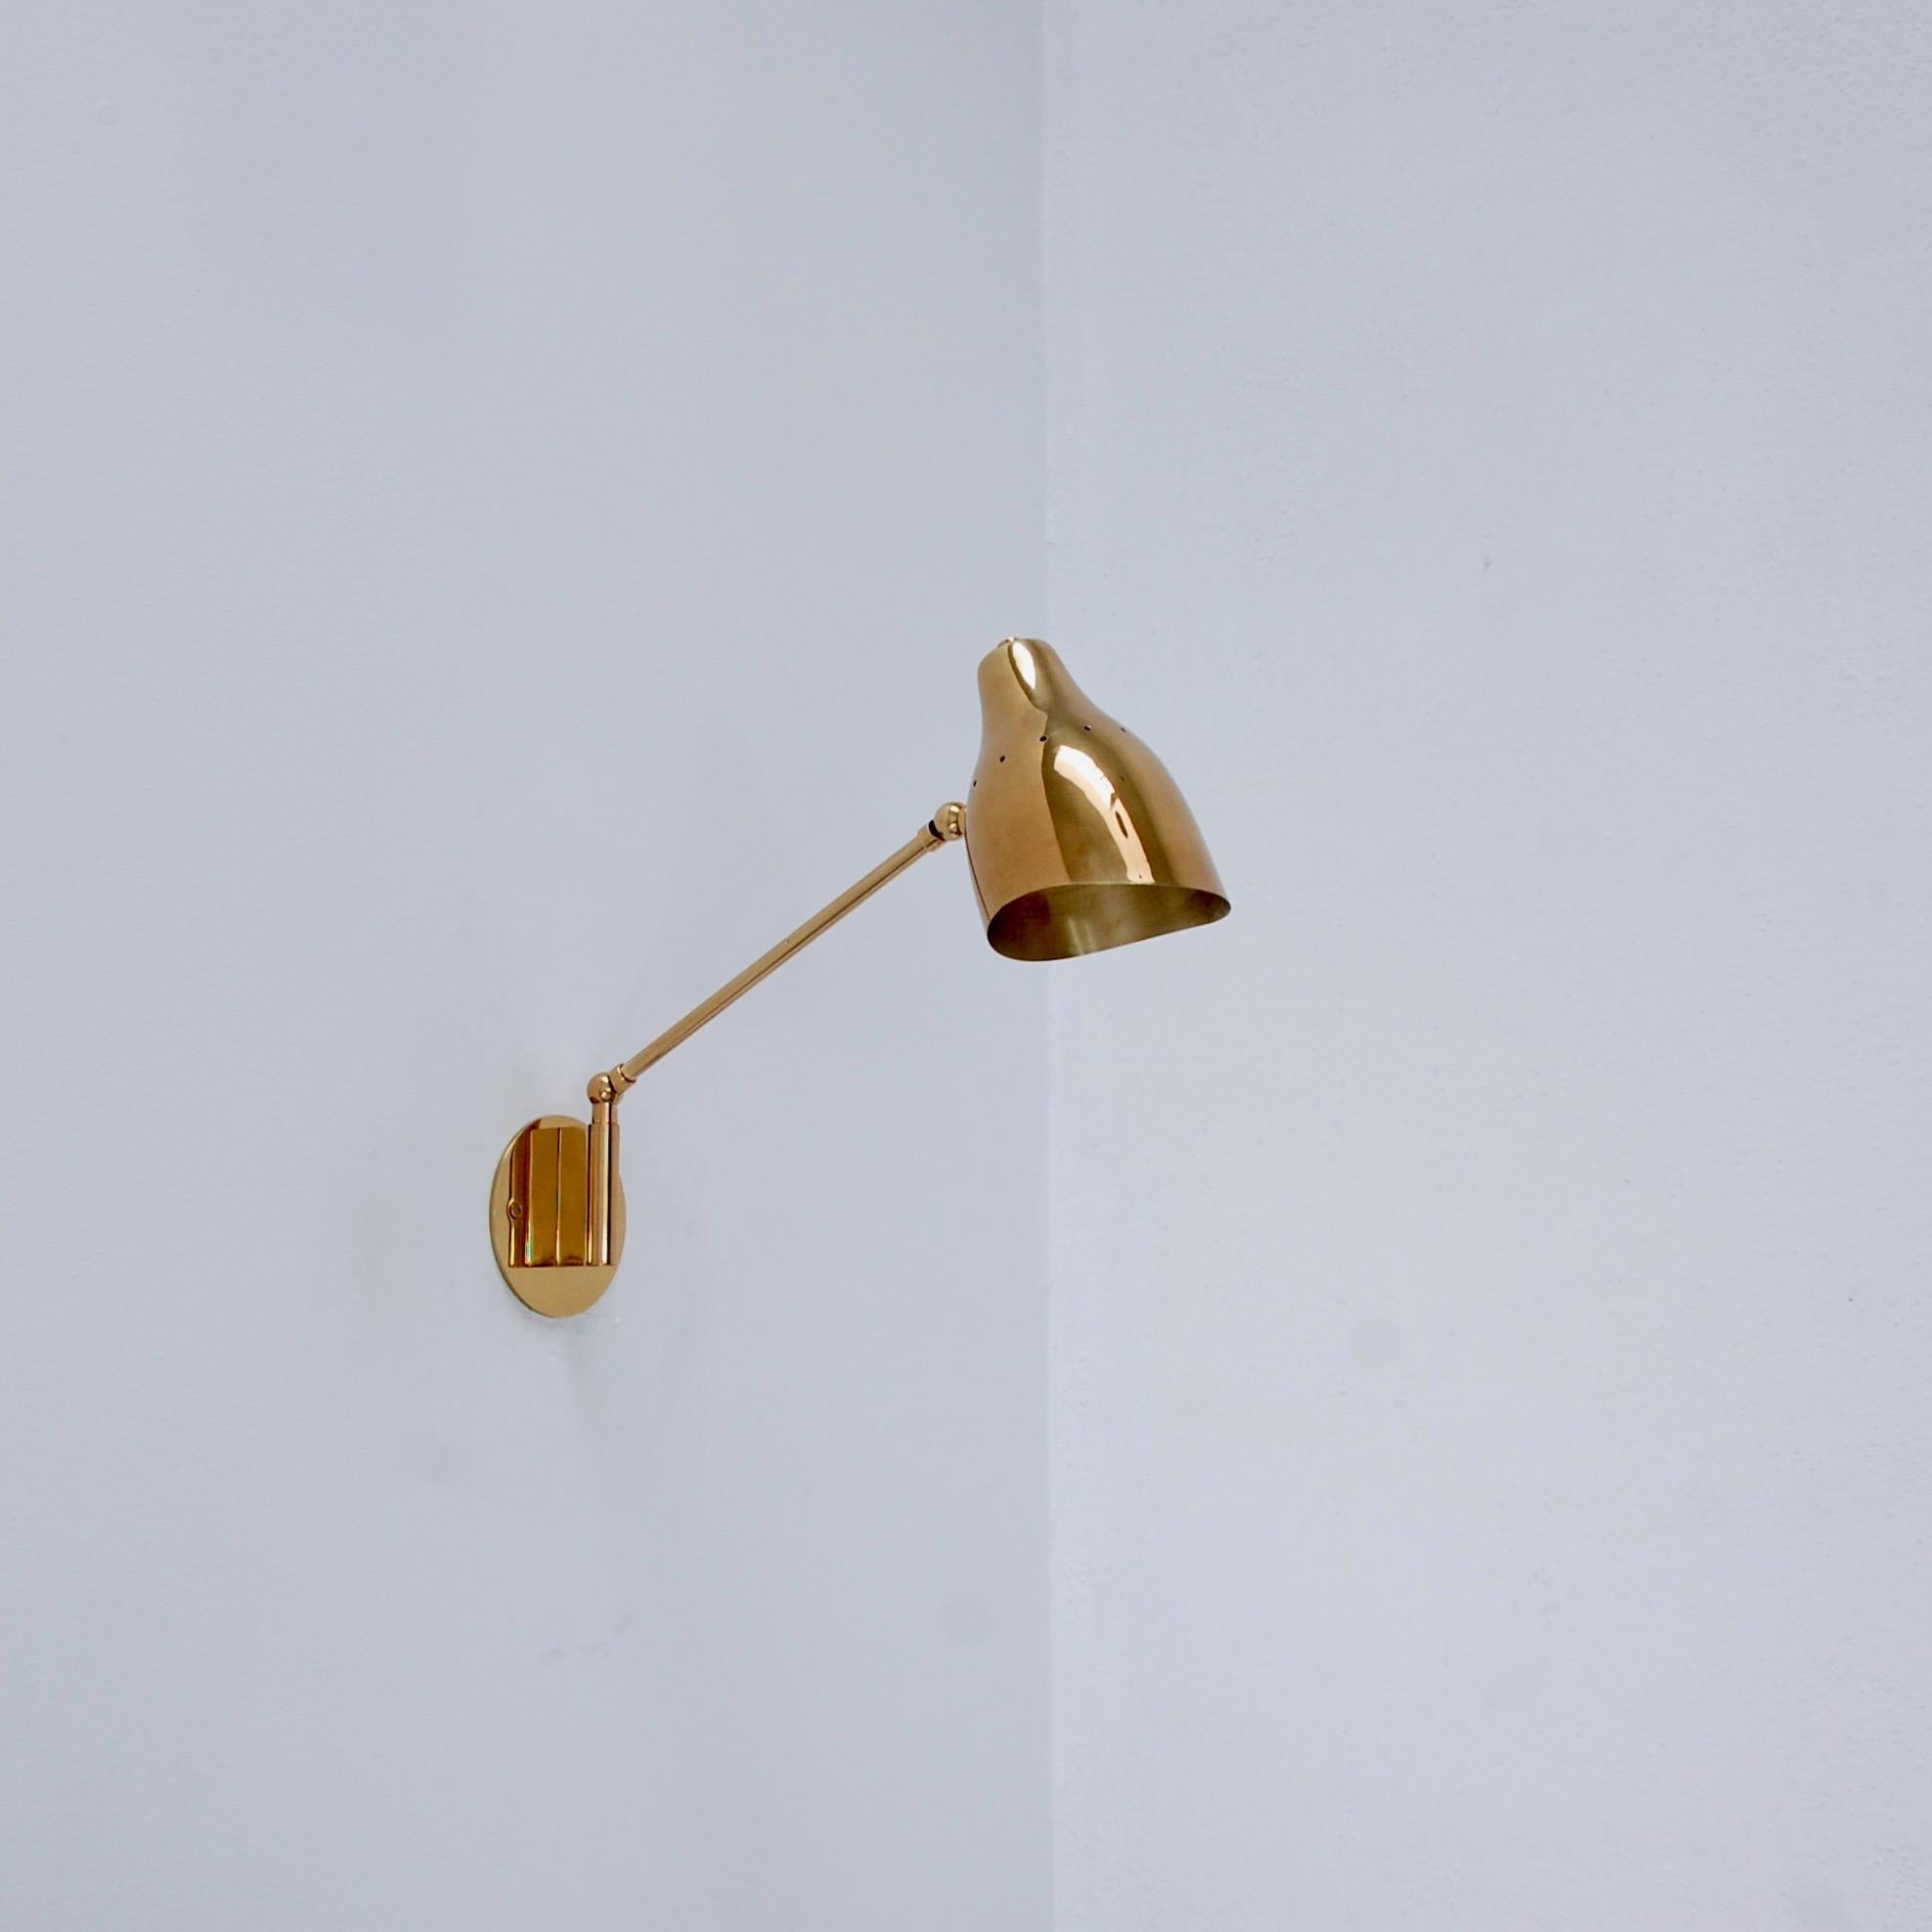 A foldable and swing version of our original LU read sconce with a foldable and swingable articulated arm to allow for more variance in light direction. Made in solid brass including shade. Lightly aged brass finish. Custom dimensions available upon